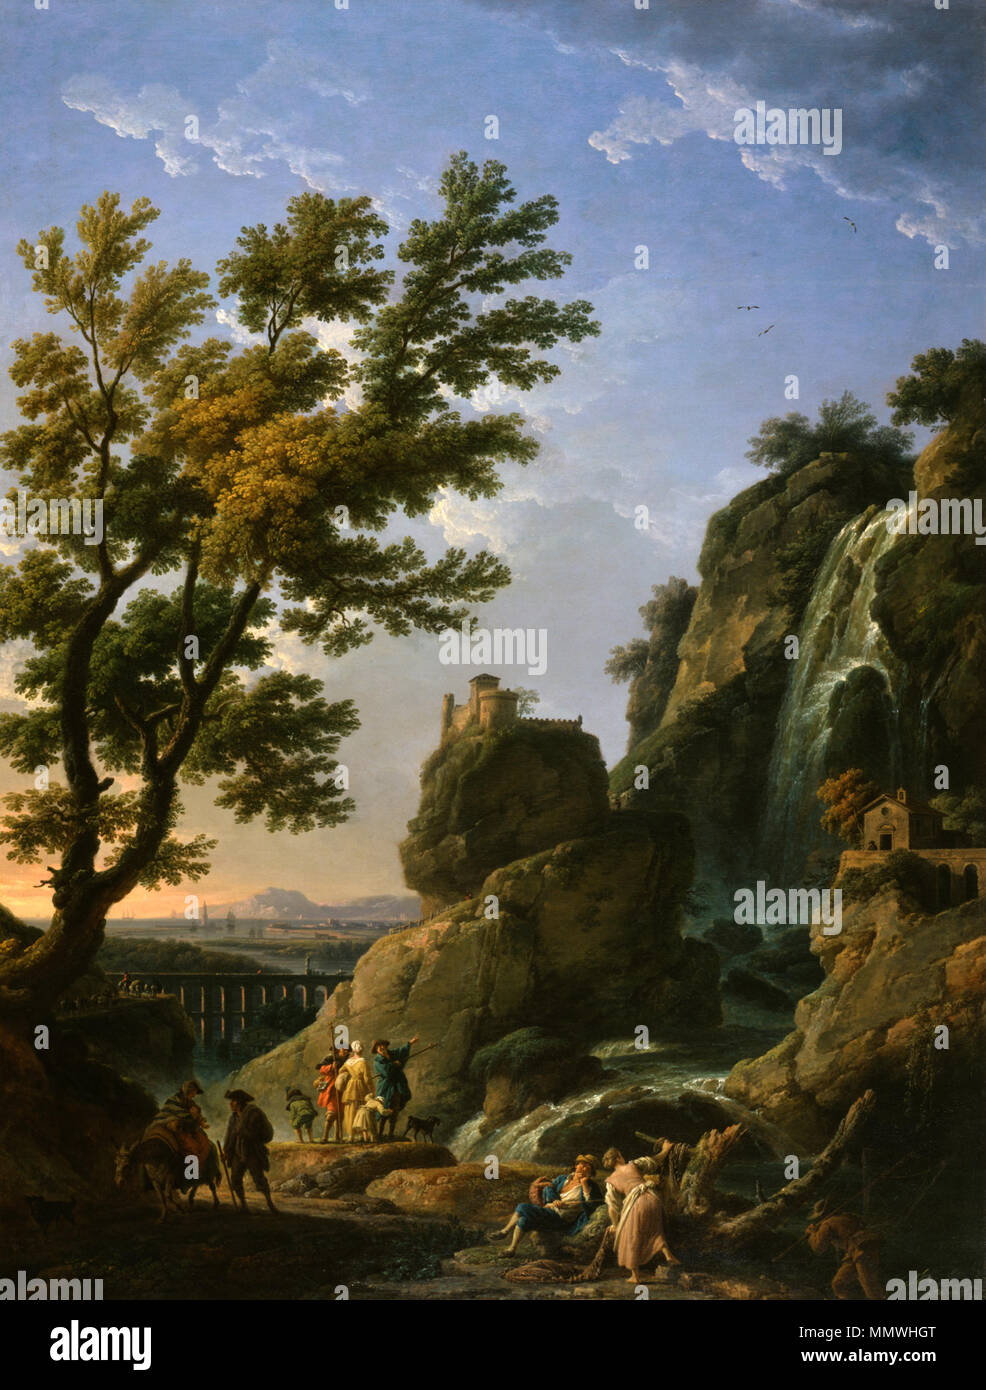 37.2411 Claude-Joseph Vernet (French, 1714-1789). 'Landscape with Waterfall and Figures,' 1768. oil on canvas. Walters Art Museum (37.2411): Museum purchase, 1964. Claude-Joseph Vernet - Landscape with Waterfall and Figures - Walters 372411 Stock Photo